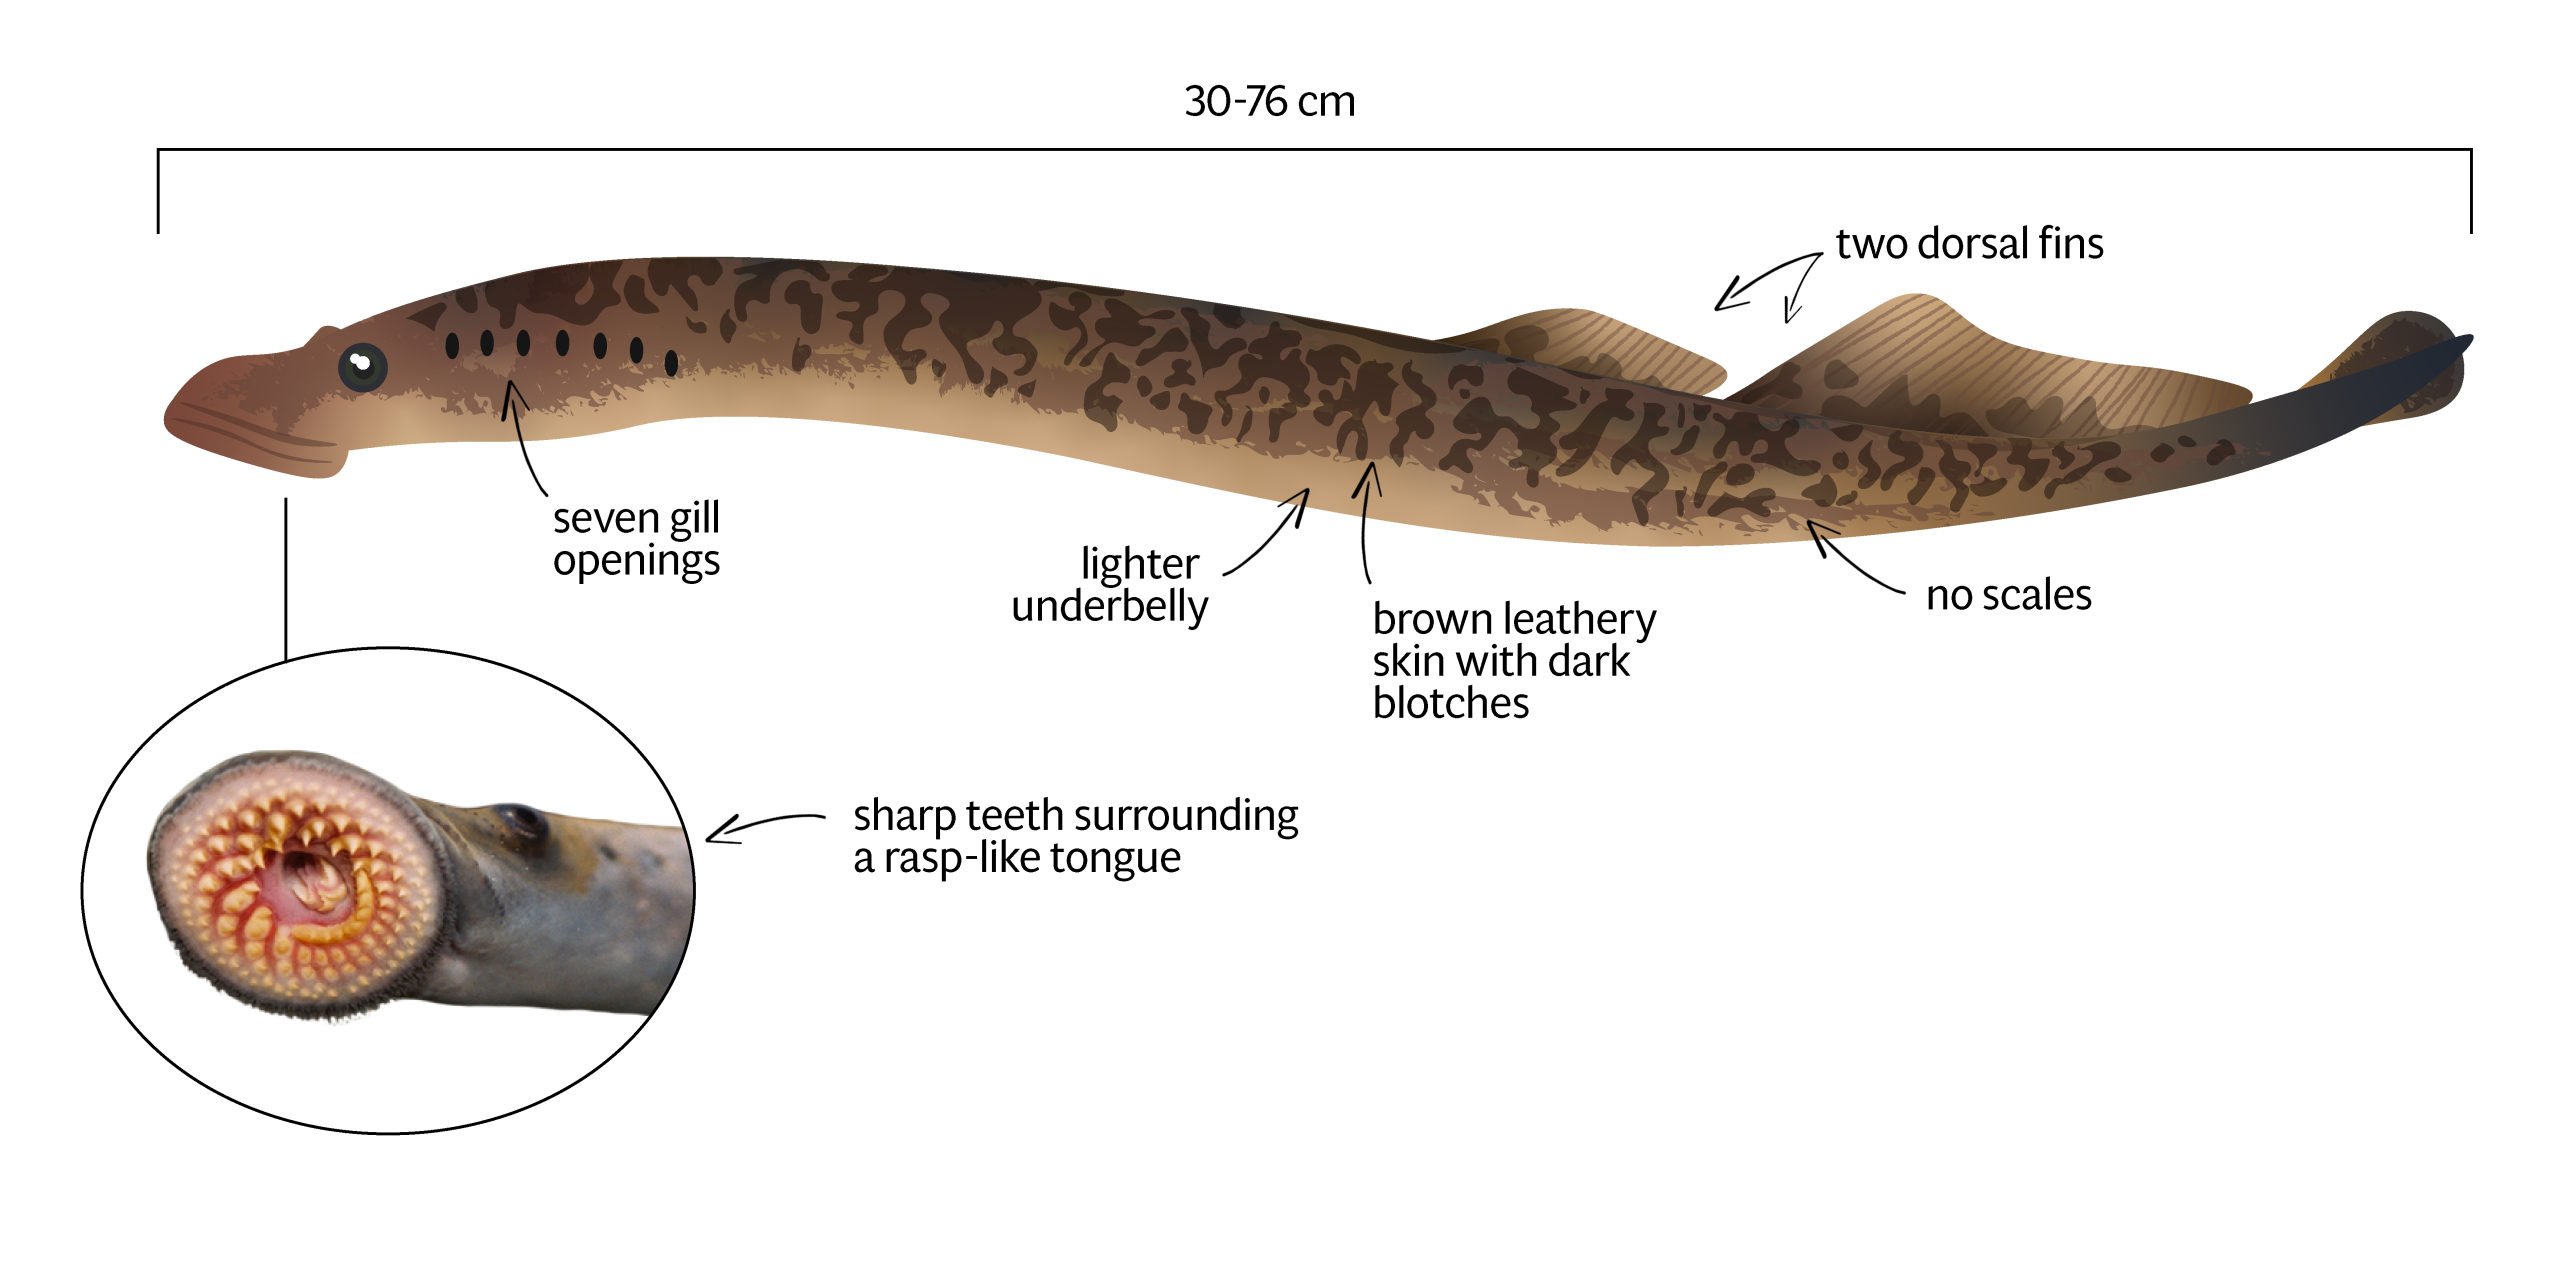 Sea Lamprey Profile And Resources, What Are Sea Lampreys Good For